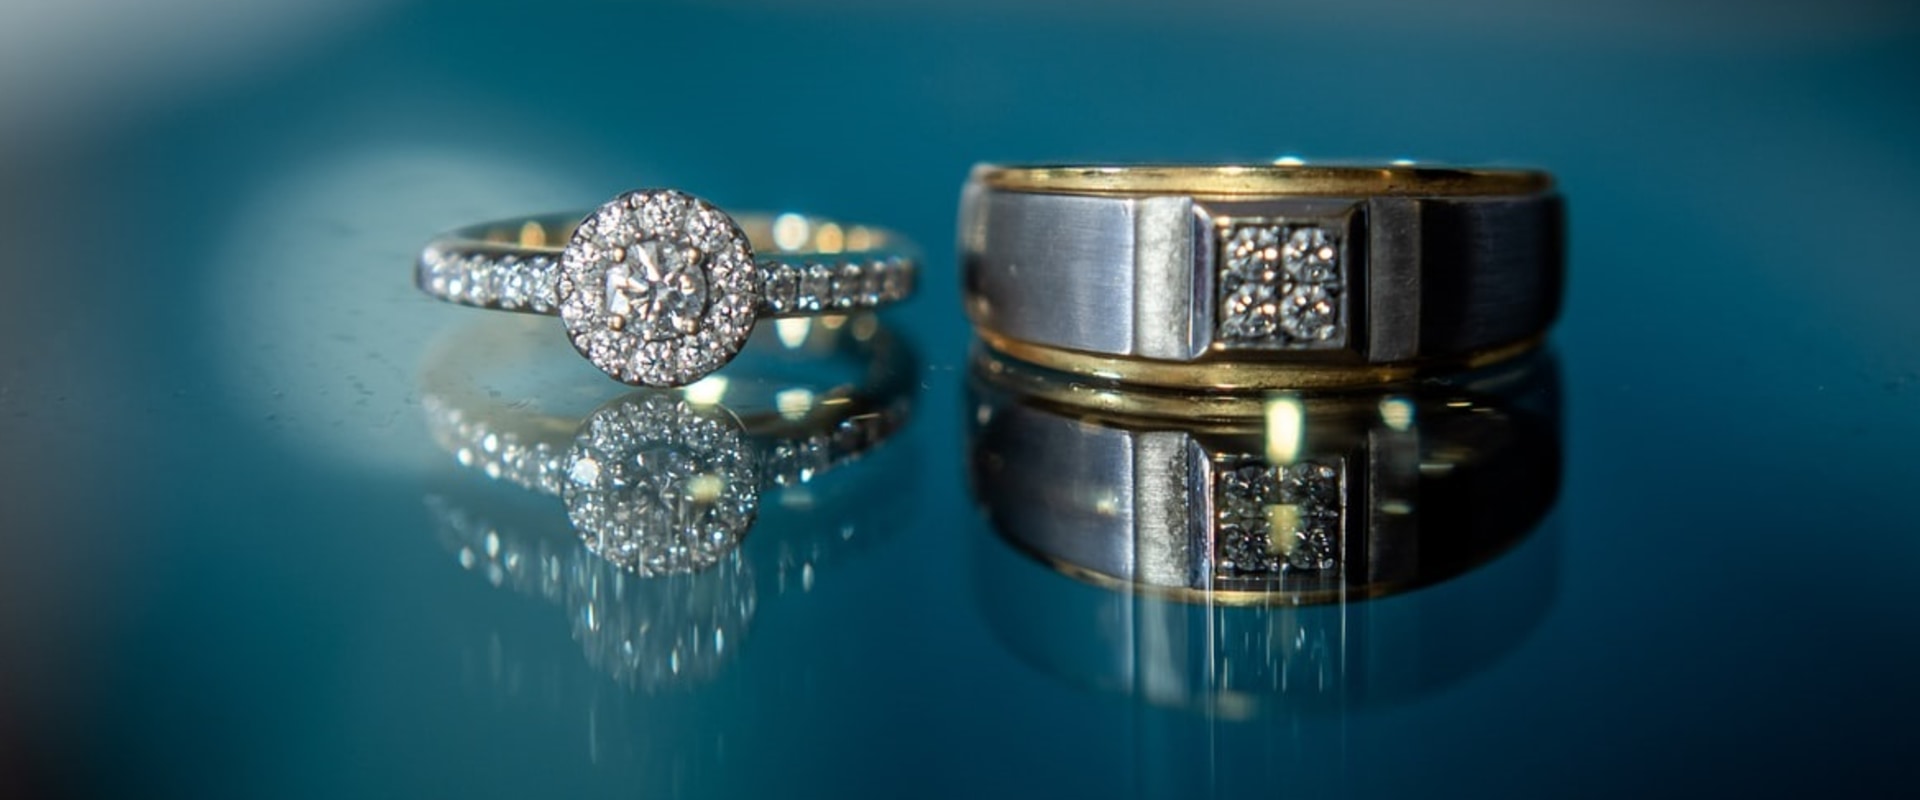 How do you photograph jewelry without reflection?